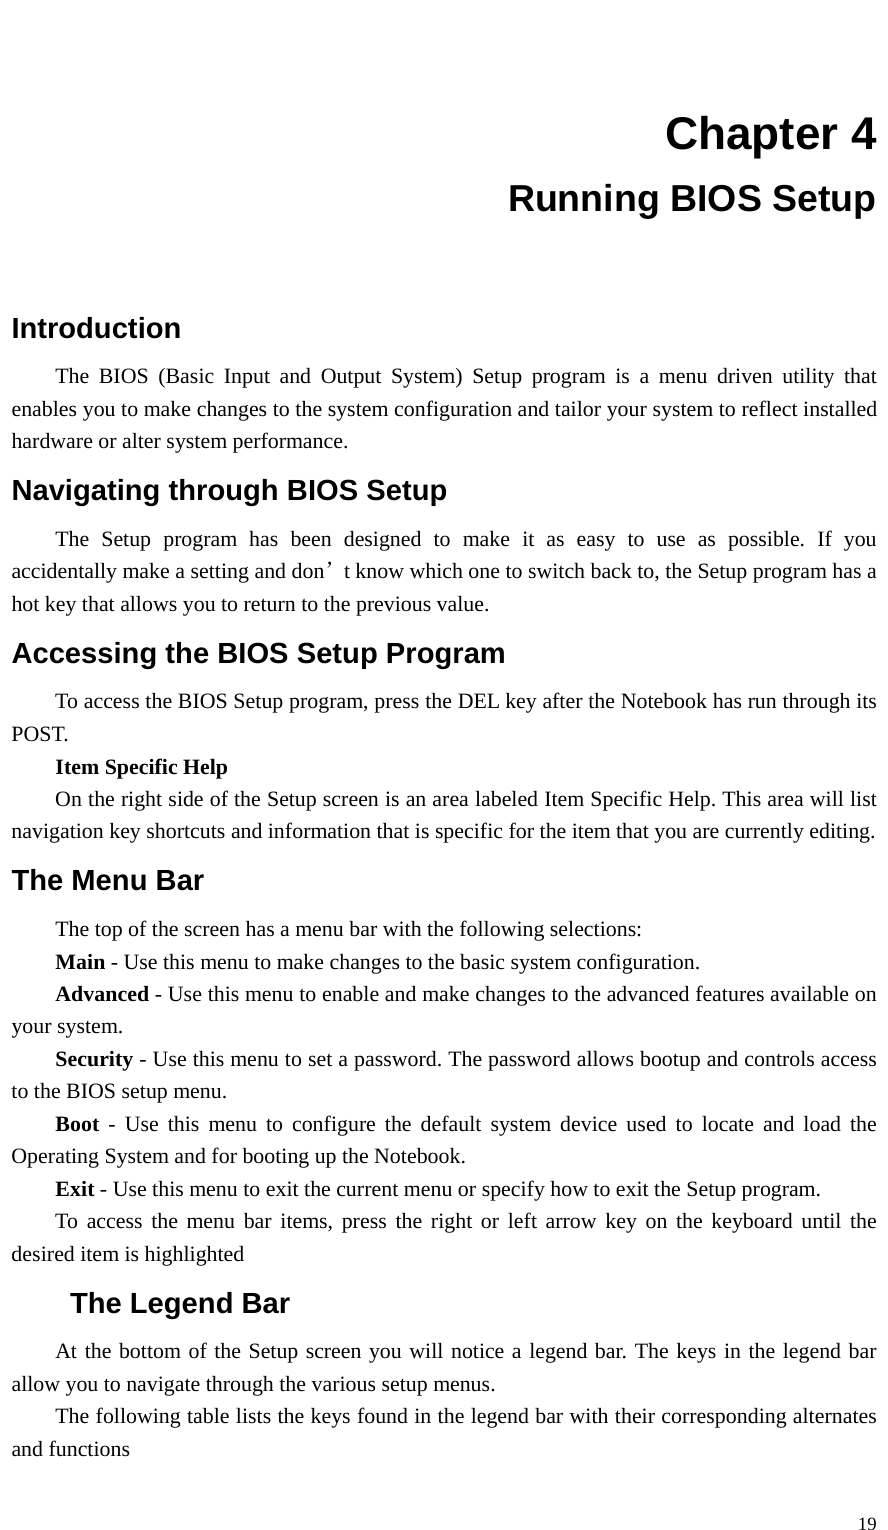   19  Chapter 4 Running BIOS Setup  Introduction The BIOS (Basic Input and Output System) Setup program is a menu driven utility that enables you to make changes to the system configuration and tailor your system to reflect installed hardware or alter system performance. Navigating through BIOS Setup The Setup program has been designed to make it as easy to use as possible. If you accidentally make a setting and don’t know which one to switch back to, the Setup program has a hot key that allows you to return to the previous value. Accessing the BIOS Setup Program To access the BIOS Setup program, press the DEL key after the Notebook has run through its POST. Item Specific Help  On the right side of the Setup screen is an area labeled Item Specific Help. This area will list navigation key shortcuts and information that is specific for the item that you are currently editing. The Menu Bar The top of the screen has a menu bar with the following selections: Main - Use this menu to make changes to the basic system configuration. Advanced - Use this menu to enable and make changes to the advanced features available on your system. Security - Use this menu to set a password. The password allows bootup and controls access to the BIOS setup menu. Boot - Use this menu to configure the default system device used to locate and load the Operating System and for booting up the Notebook. Exit - Use this menu to exit the current menu or specify how to exit the Setup program. To access the menu bar items, press the right or left arrow key on the keyboard until the desired item is highlighted The Legend Bar At the bottom of the Setup screen you will notice a legend bar. The keys in the legend bar allow you to navigate through the various setup menus. The following table lists the keys found in the legend bar with their corresponding alternates and functions 